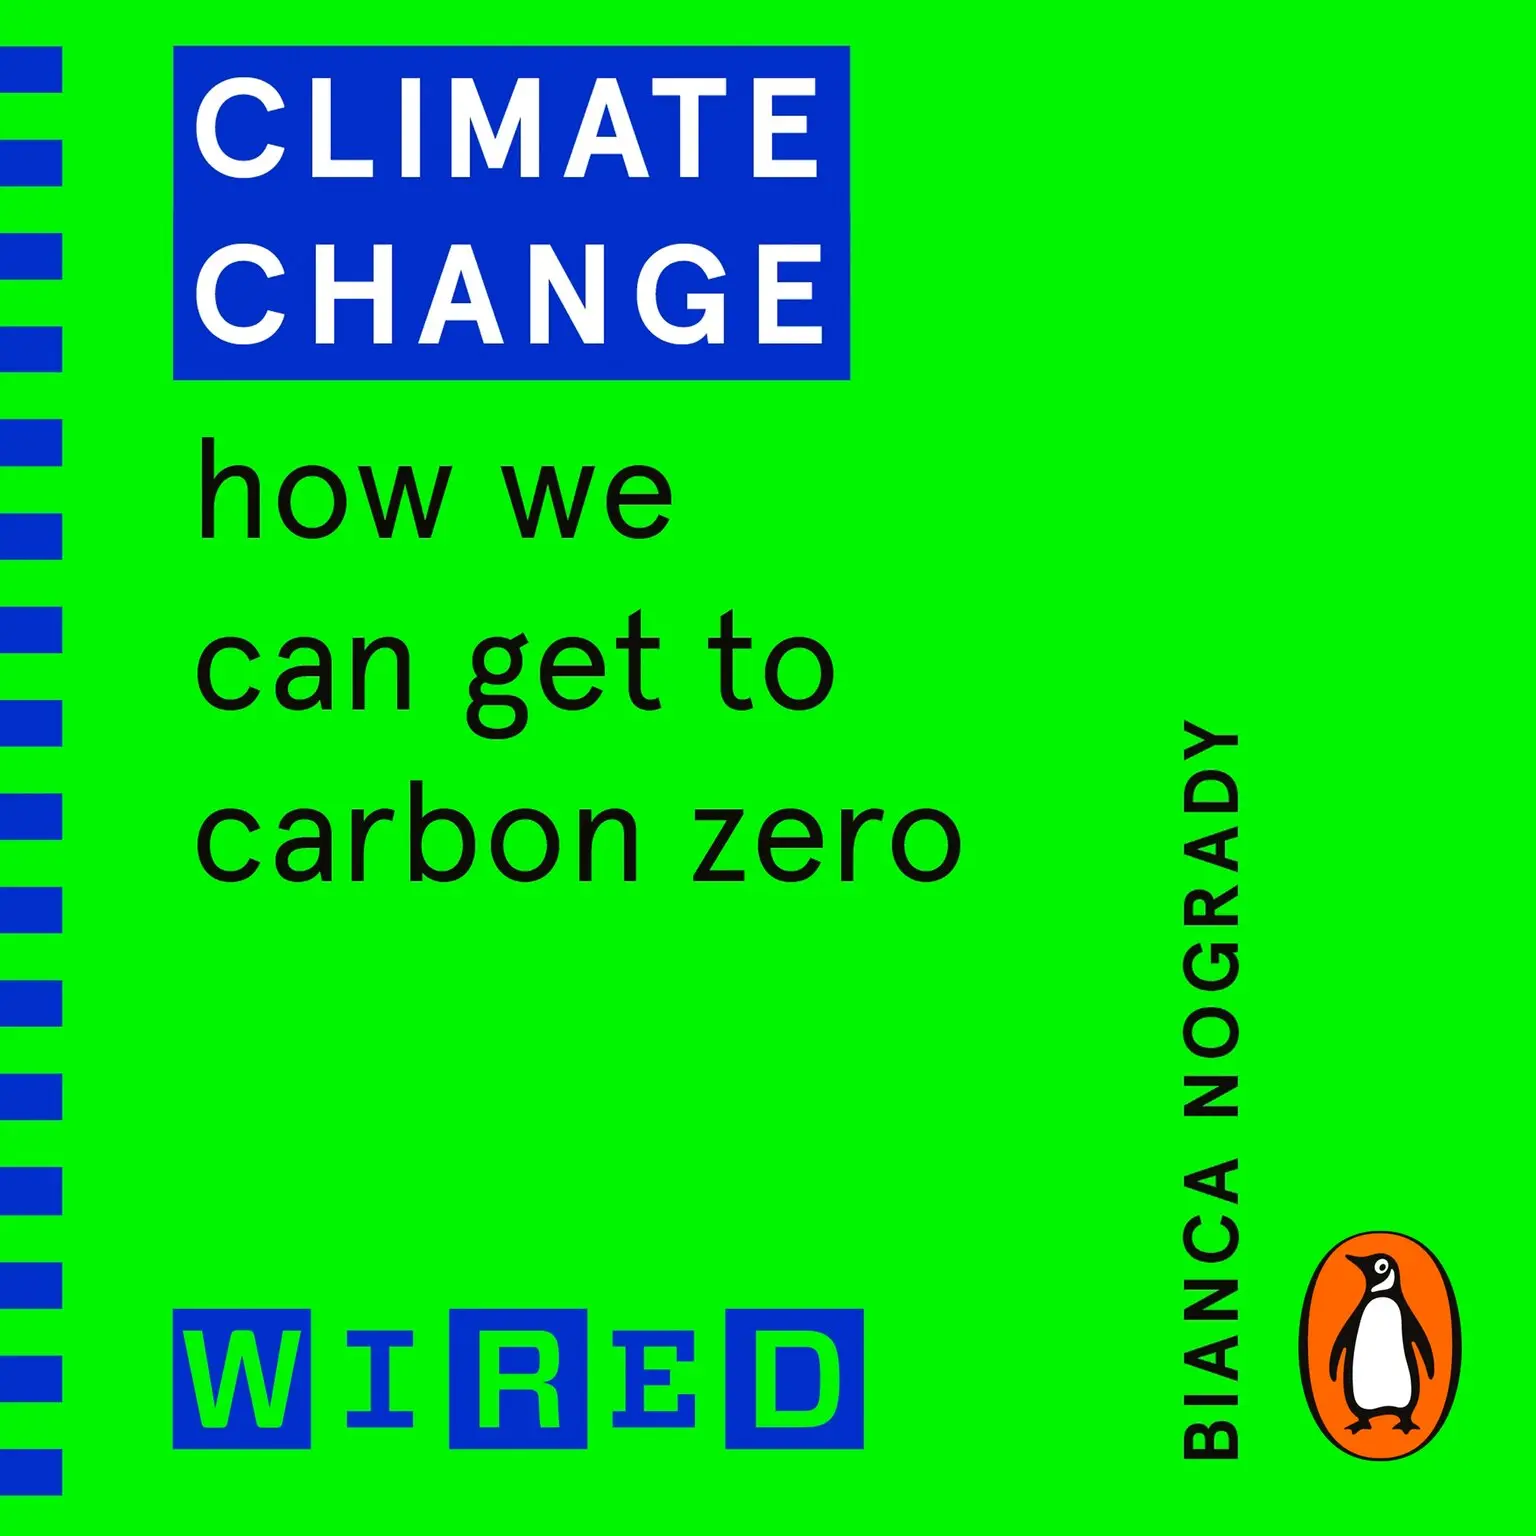 Bianca Nogrady, WIRED: Climate Change (2021, Penguin Random House)